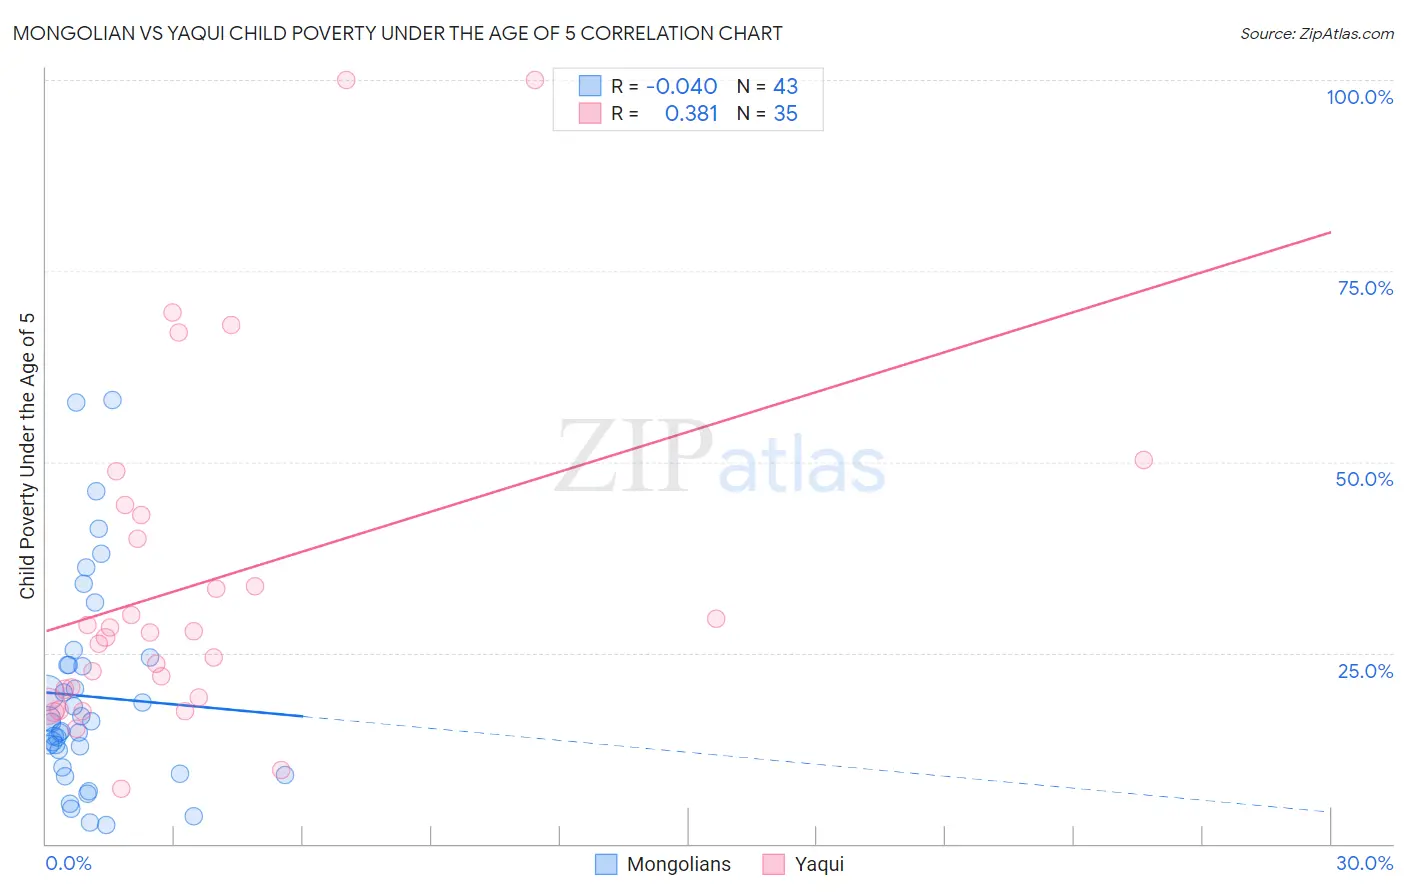 Mongolian vs Yaqui Child Poverty Under the Age of 5